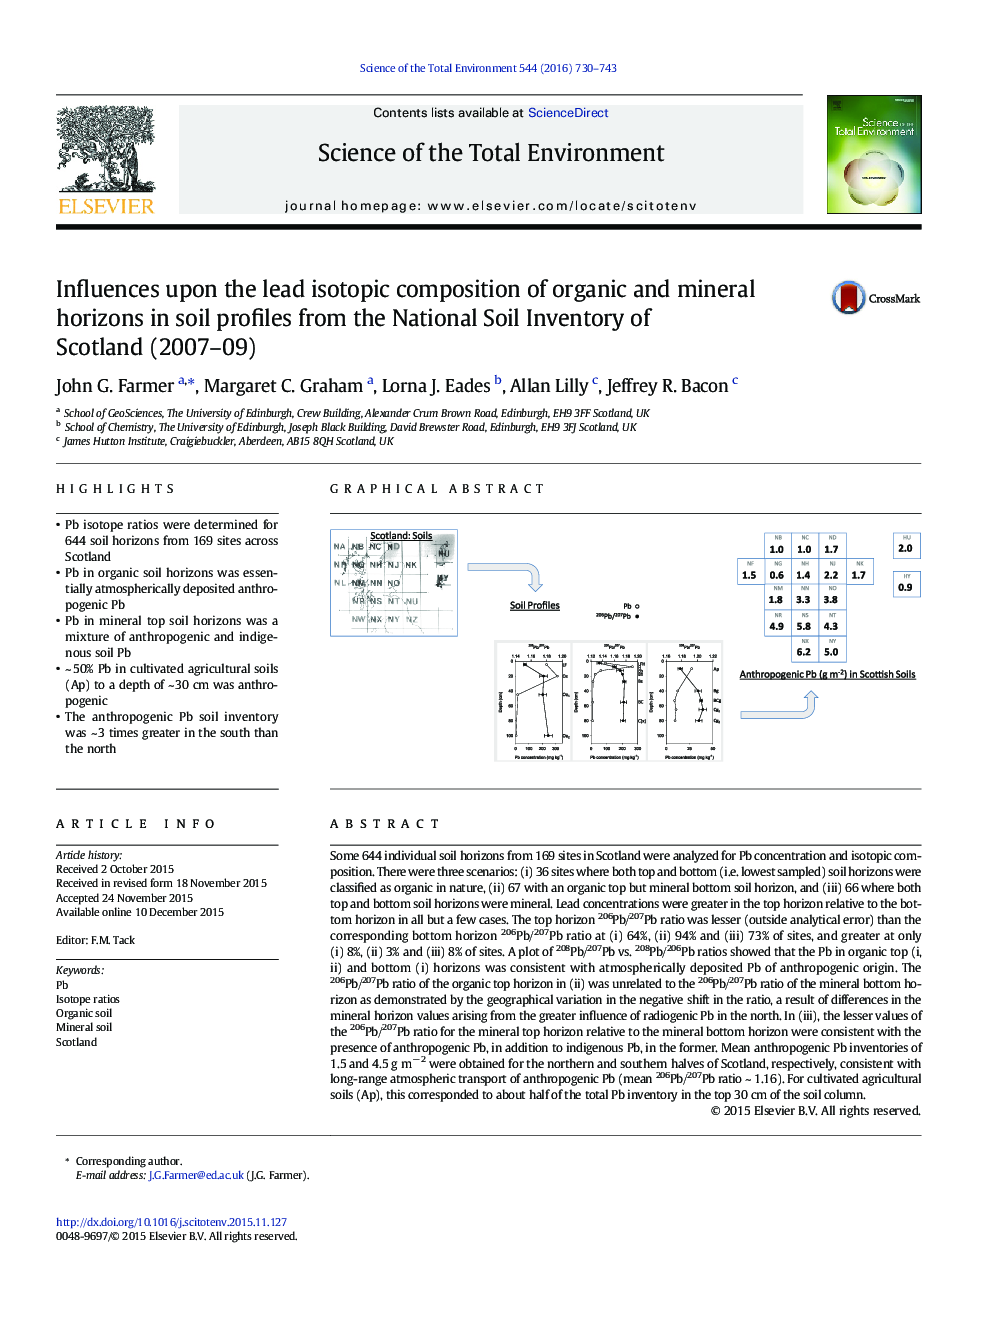 Influences upon the lead isotopic composition of organic and mineral horizons in soil profiles from the National Soil Inventory of Scotland (2007-09)